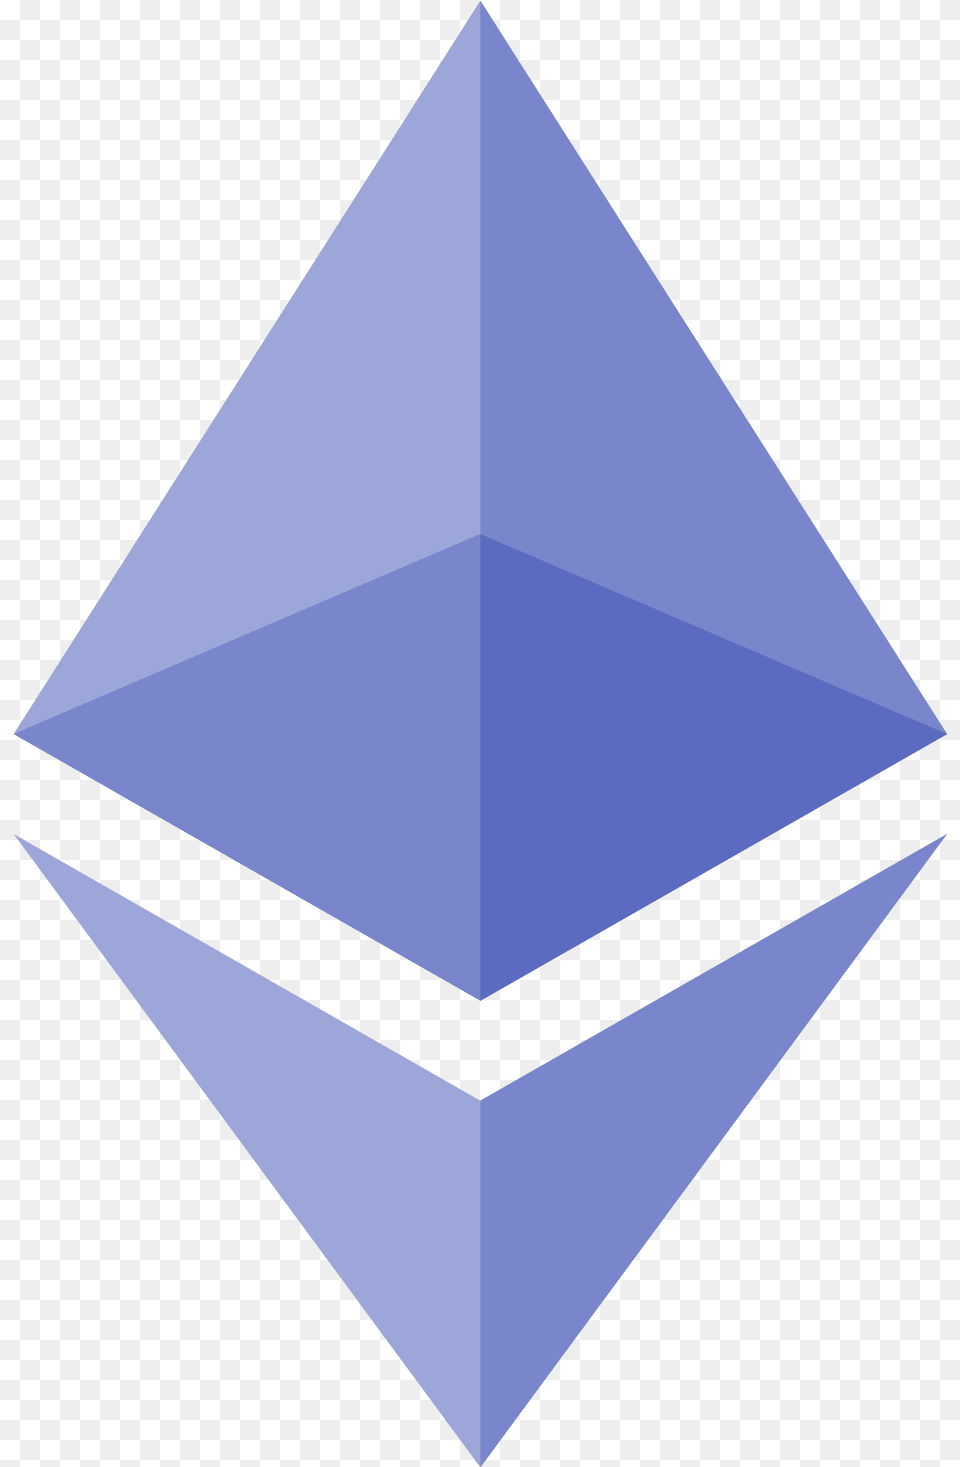 Blockchains Contracts Classic Blockchain Organisations Ethereum Logo Transparent, Triangle Free Png